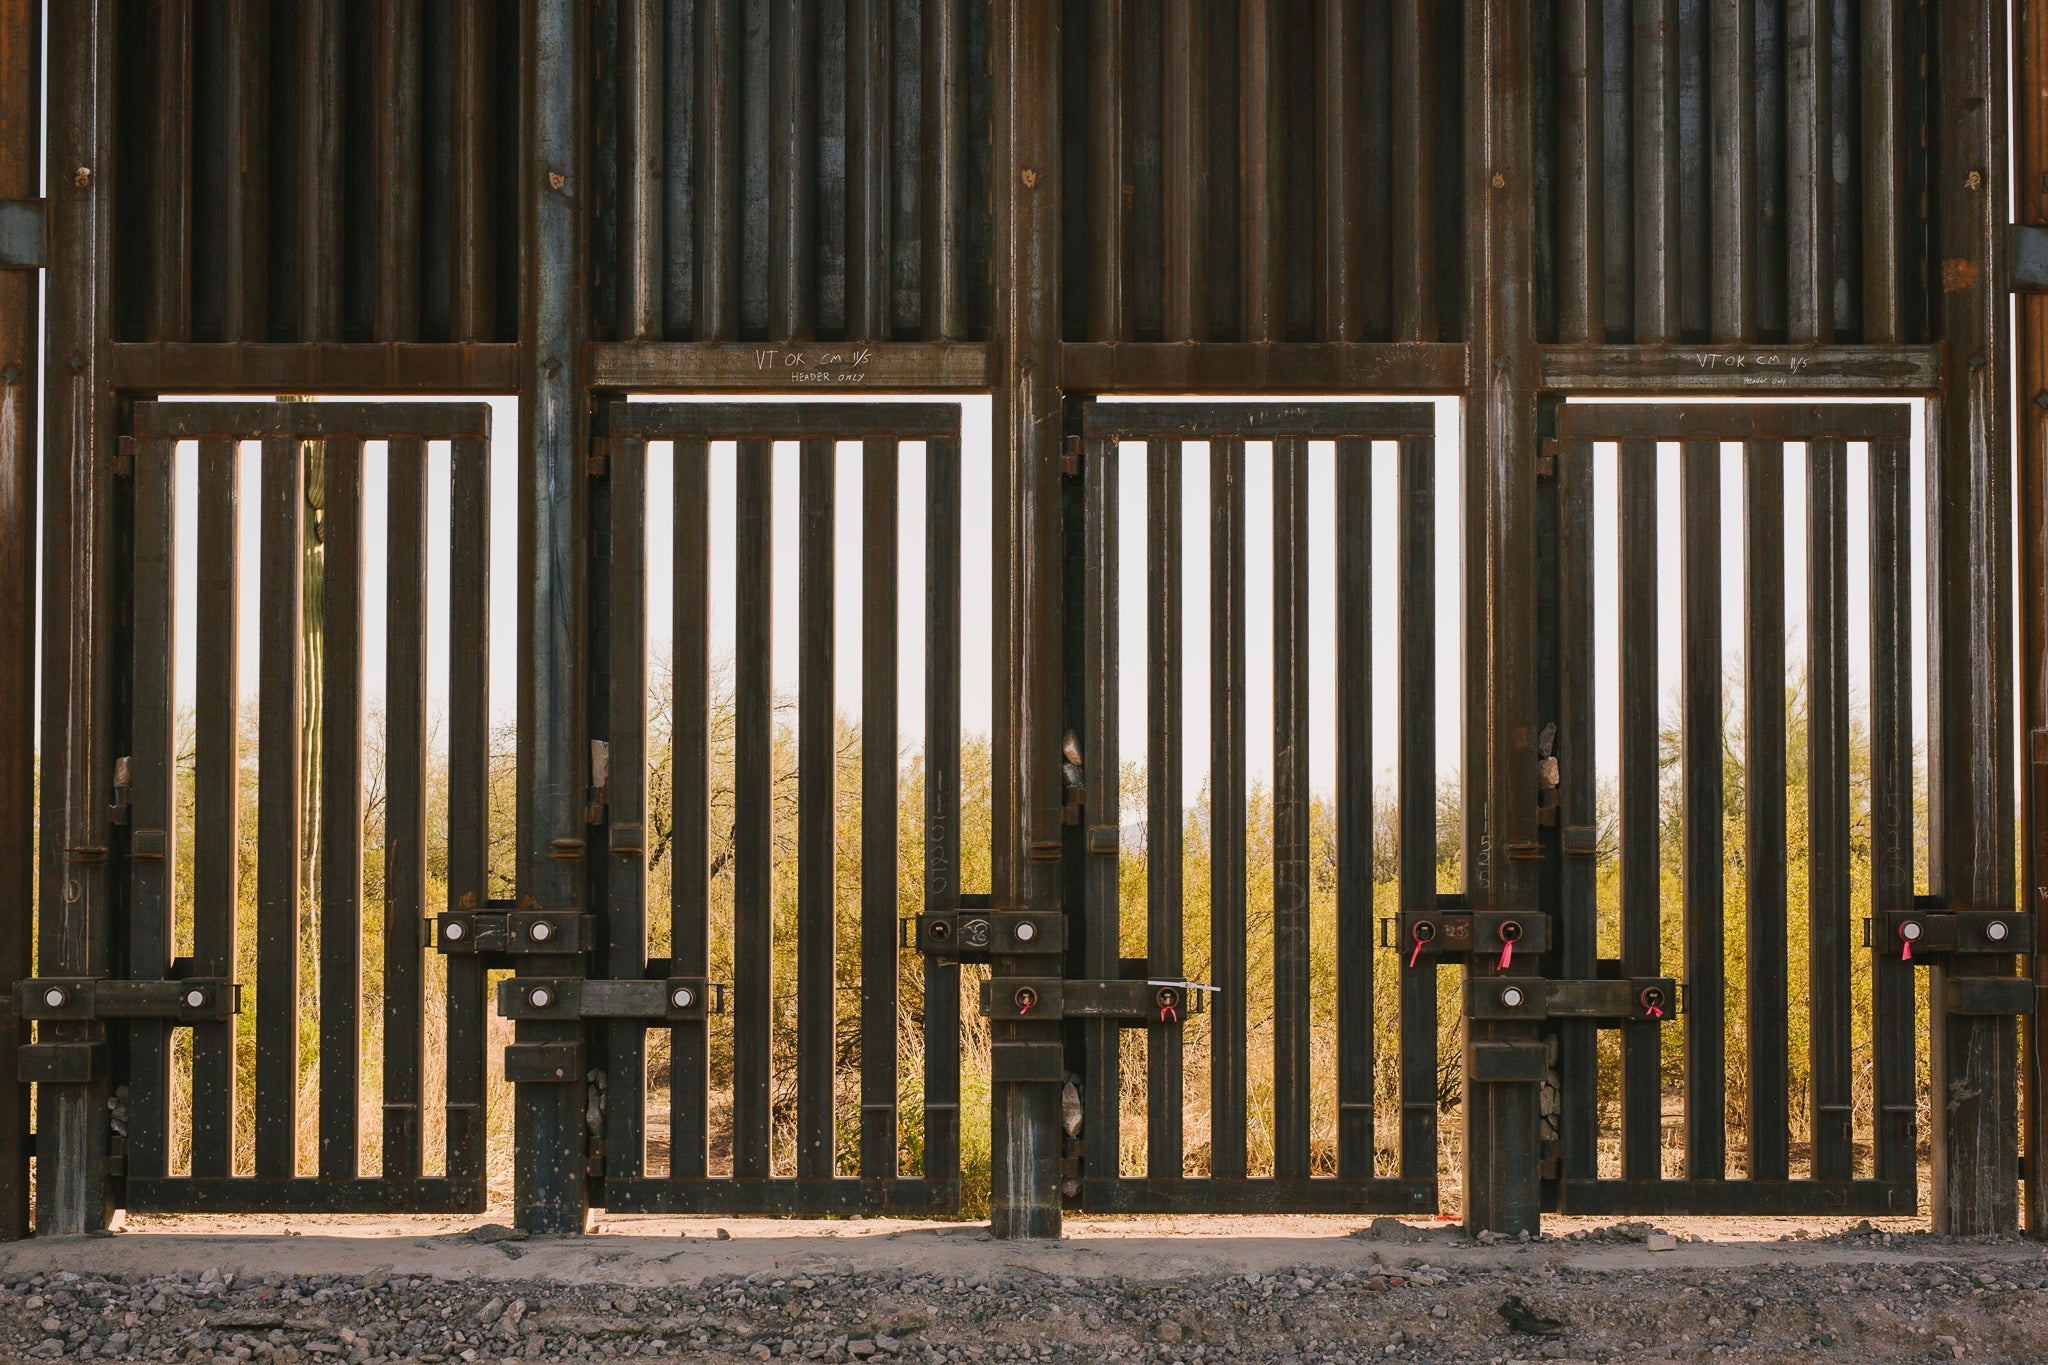 "Doors" with open metal slats at the bottom of a fence.